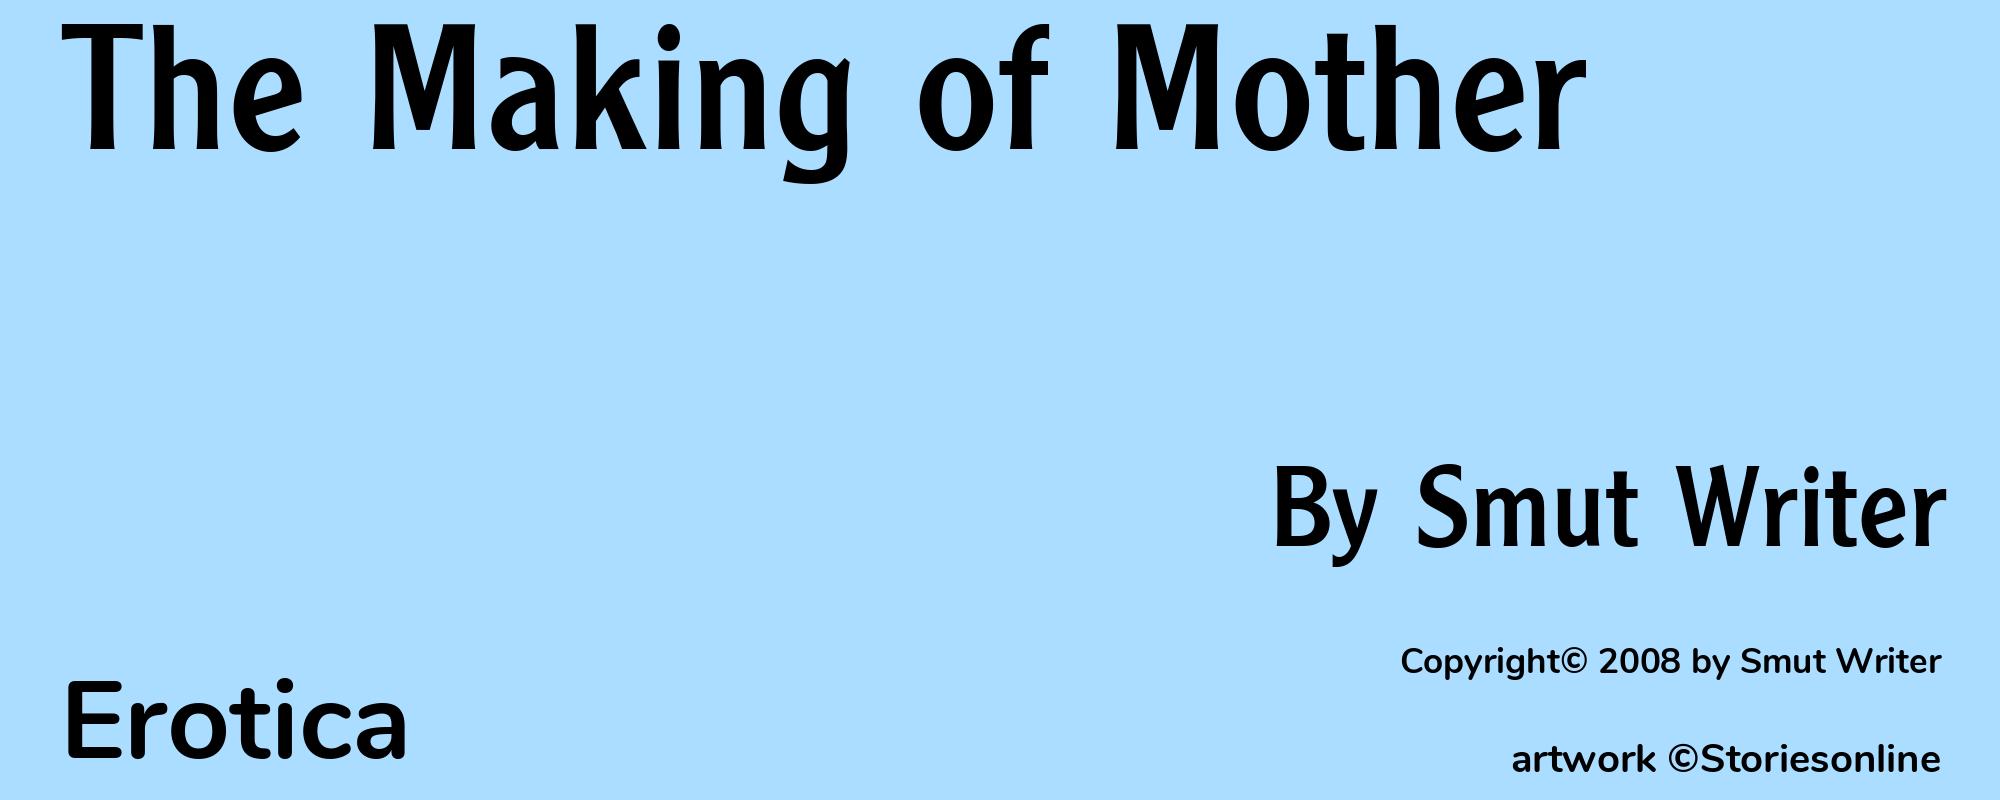 The Making of Mother - Cover